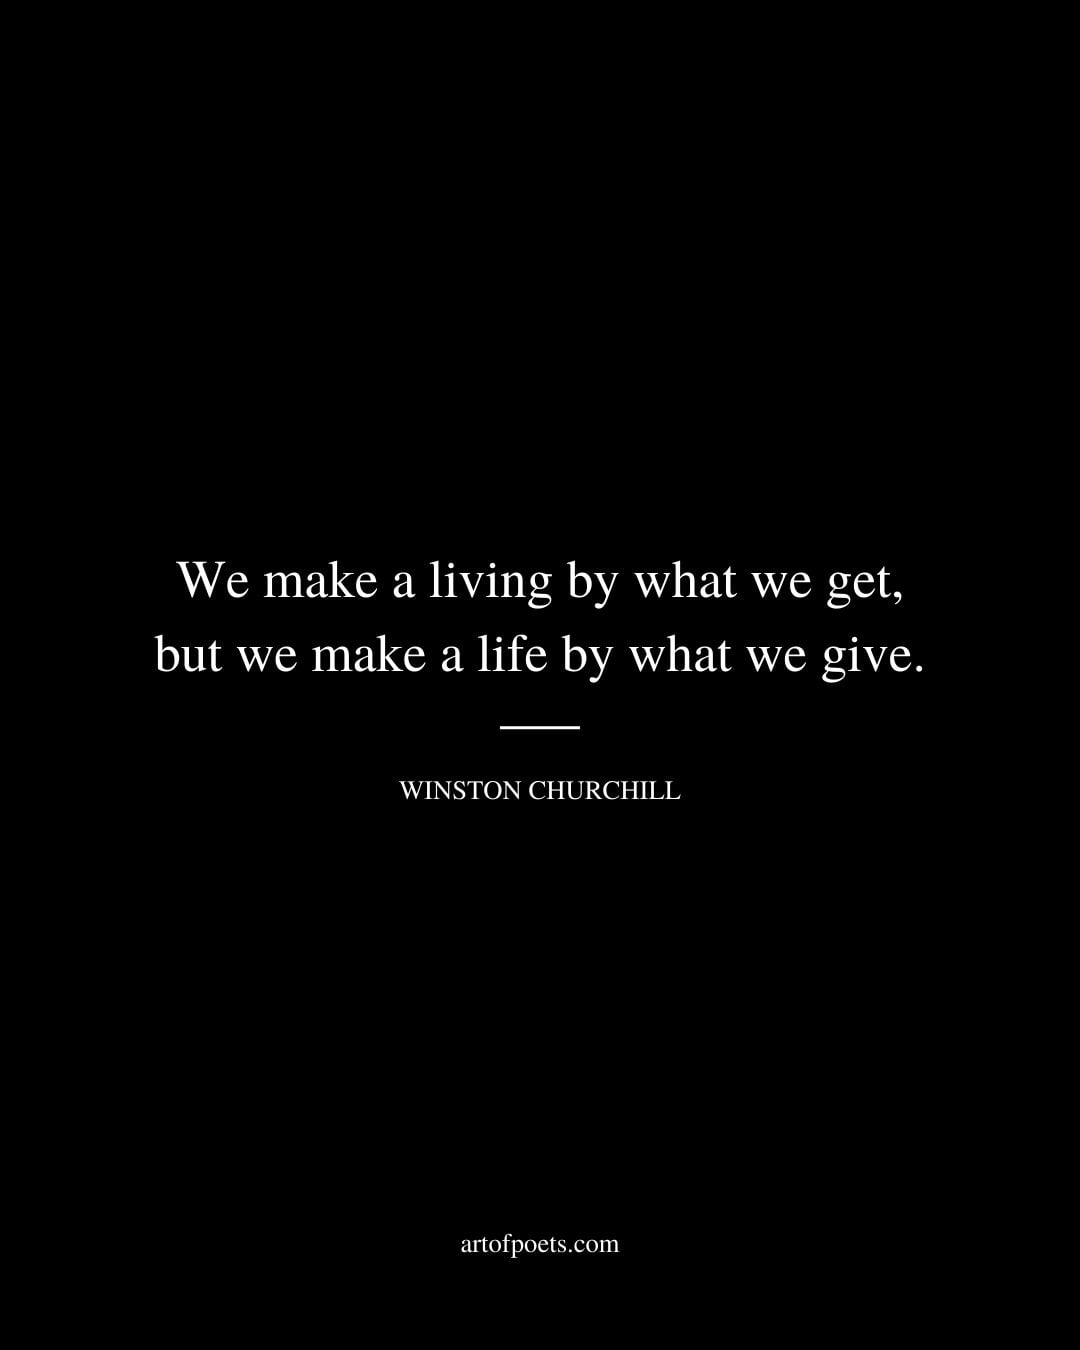 We make a living by what we get but we make a life by what we give. Winston Churchill